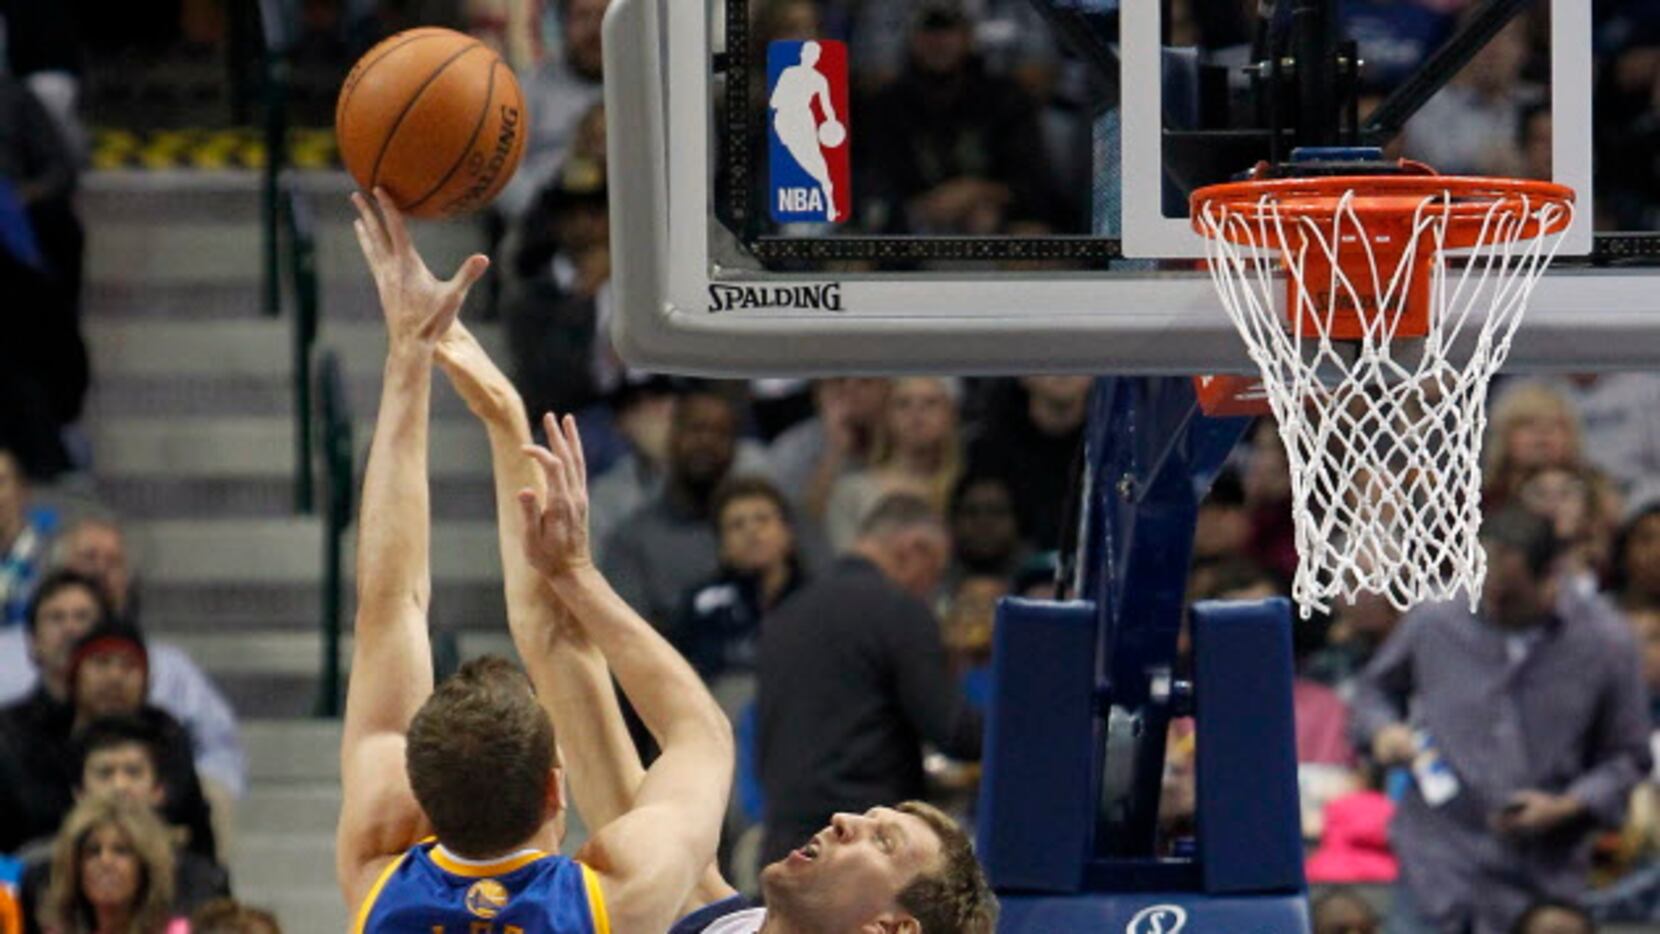 10 things you might not know about David Lee, the Mavericks' latest signee